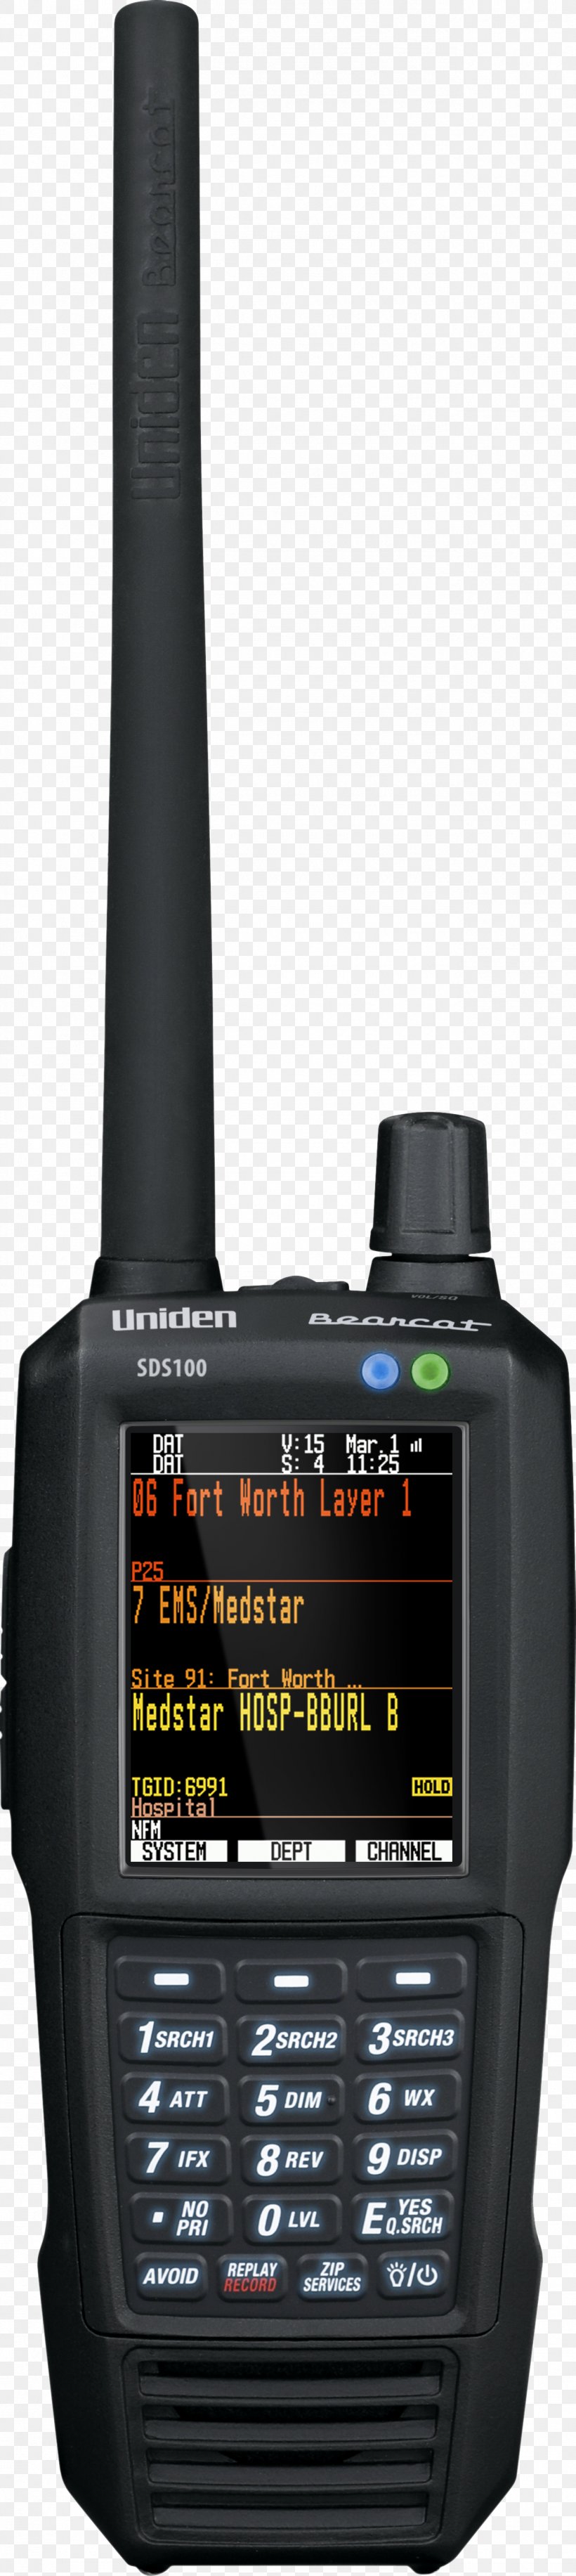 Radio Scanners Uniden Transceiver Radio Receiver Image Scanner, PNG, 1290x5767px, Radio Scanners, Electronic Device, Hardware, Image Scanner, Mobile Phones Download Free